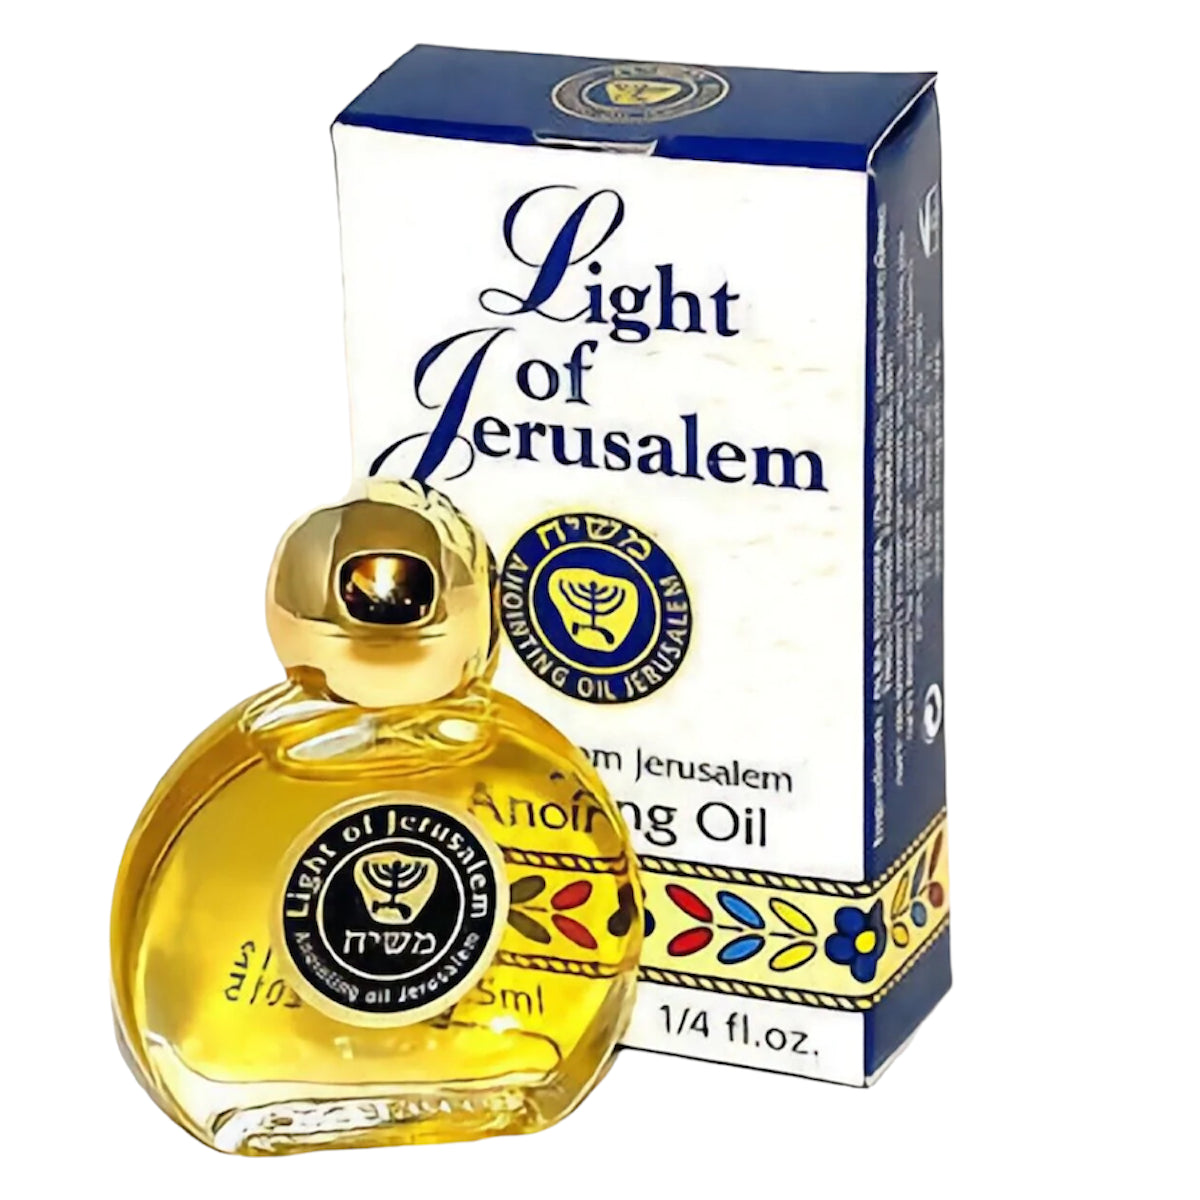 Spring Nahal Church Deal - Embrace Divine Essence: Anointing Oils, Menorahs, and Perfumes from the Holy Land